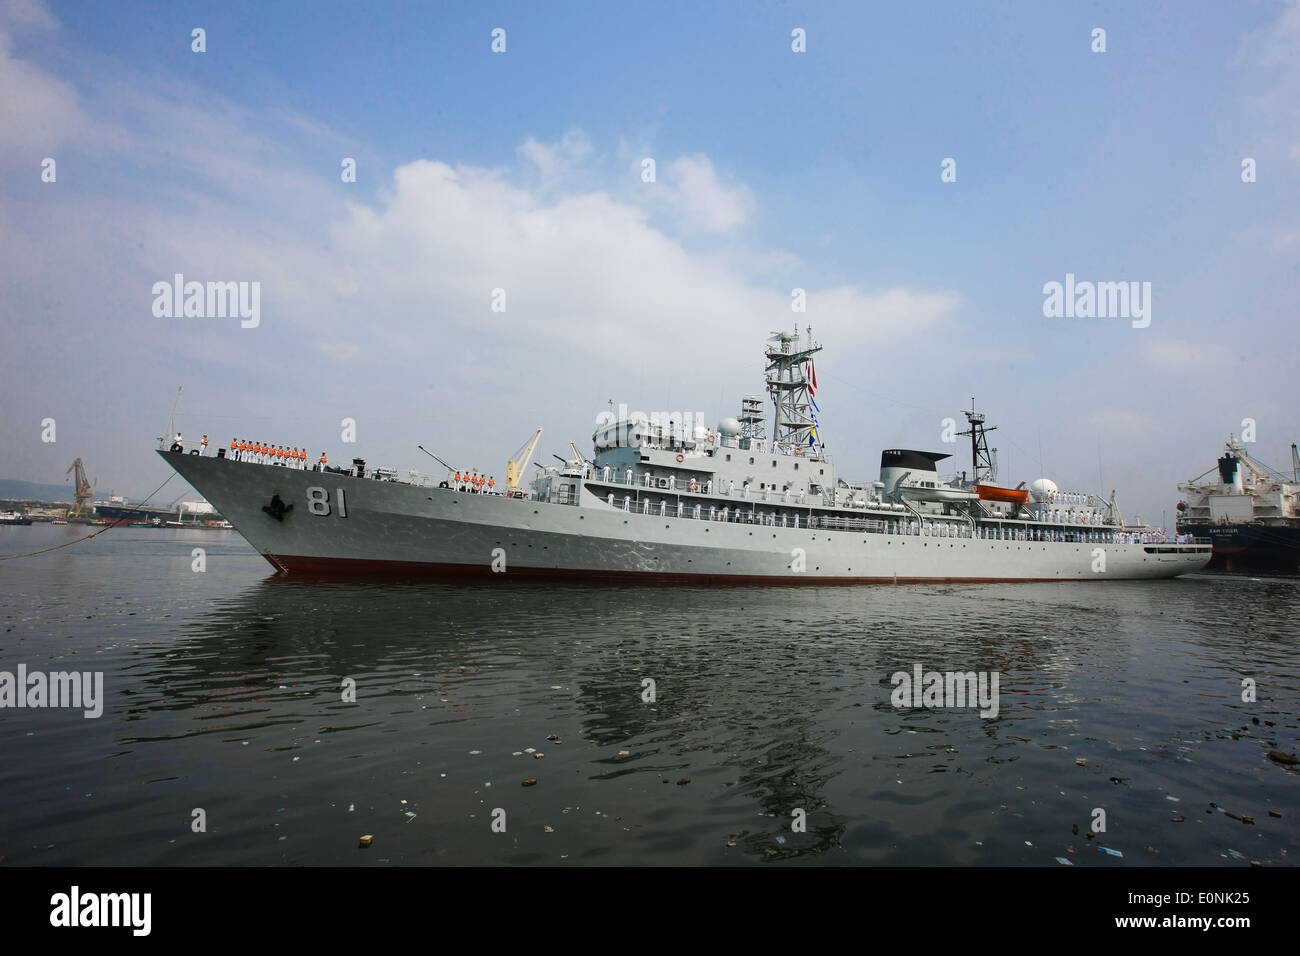 (140517) -- VISAKHAPATNAM, May 17, 2014 (Xinhua) -- Chinese Navy training vessel Zhenghe arrives at port of Visakhapatnam in east Indian on May 17, 2014. Chinese Navy training vessel Zhenghe and missile frigate Weifang arrived in port of Visakhapatnam in east Indian and started a 4-day visit on Saturday. (Xinhua/Zheng Huansong) (djj) Stock Photo